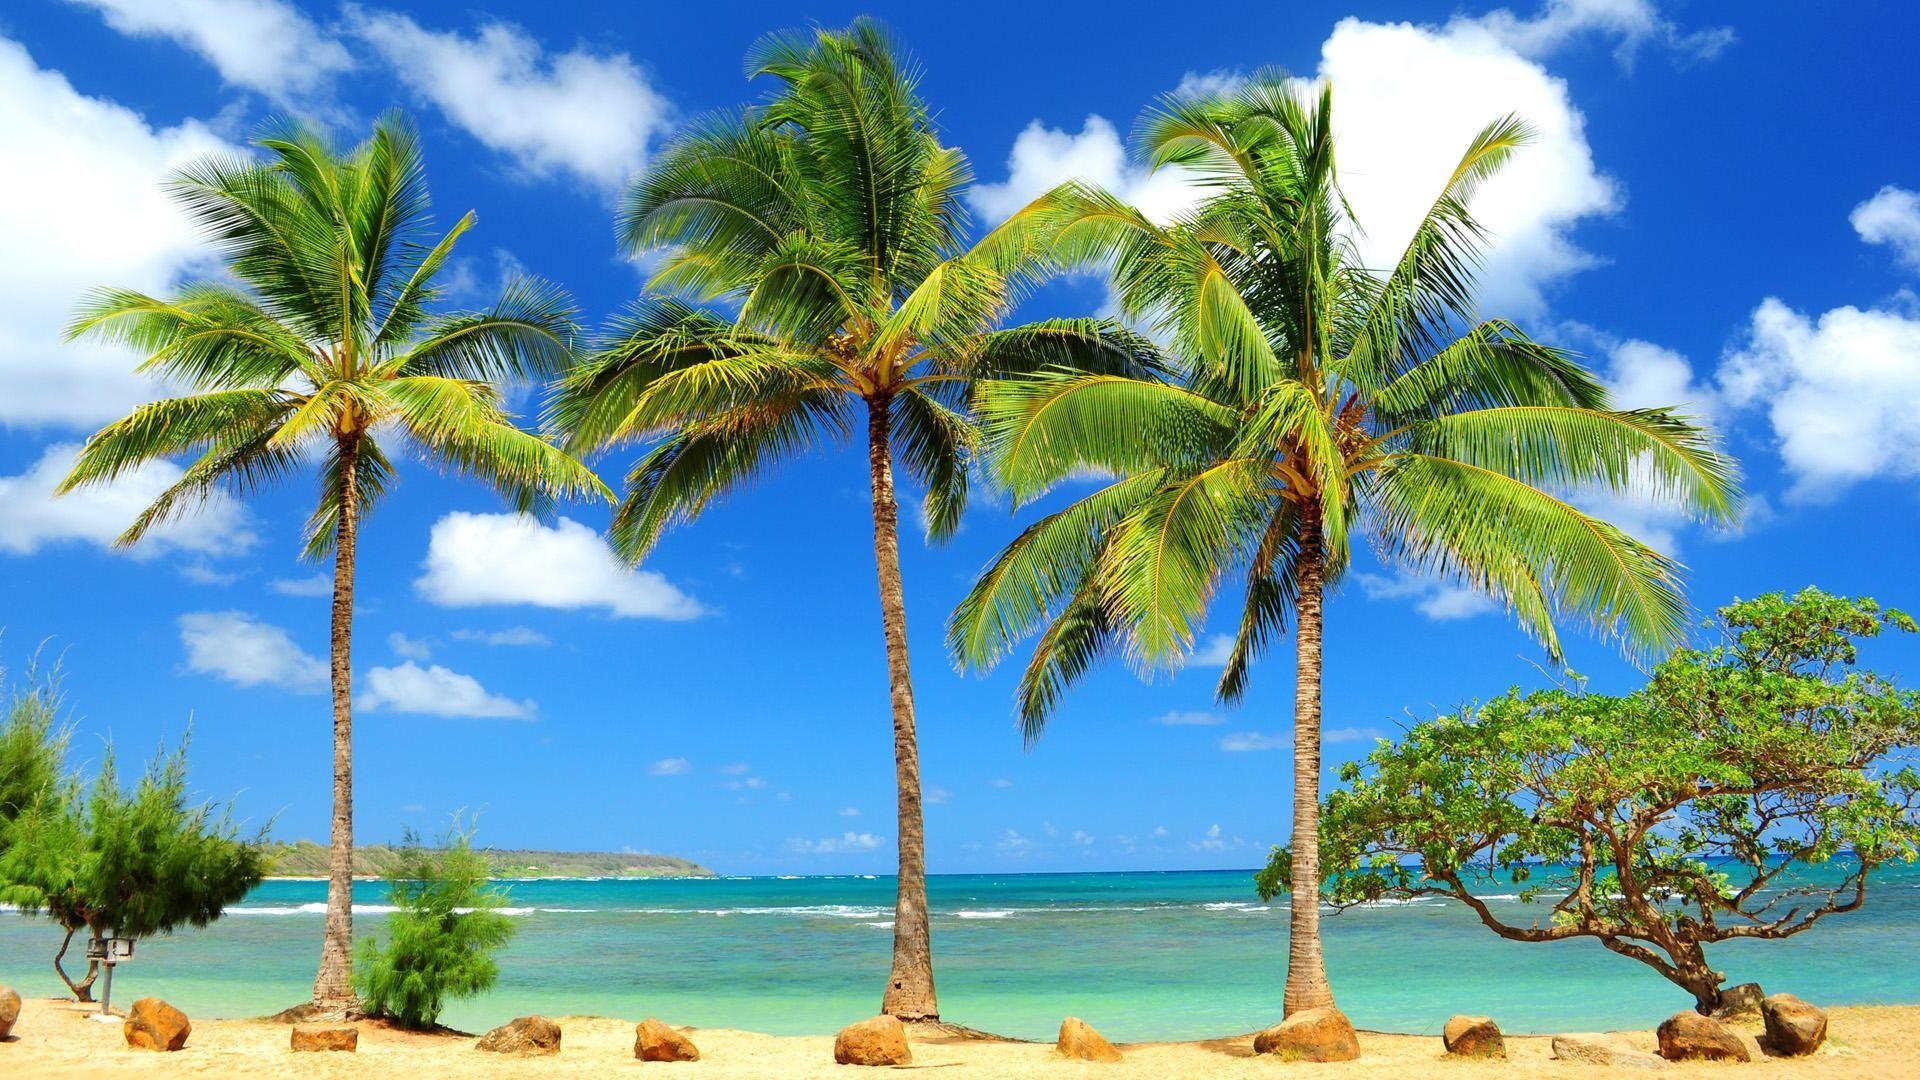 Lovely Background Image for Desktop Beaches. The Most Beautiful